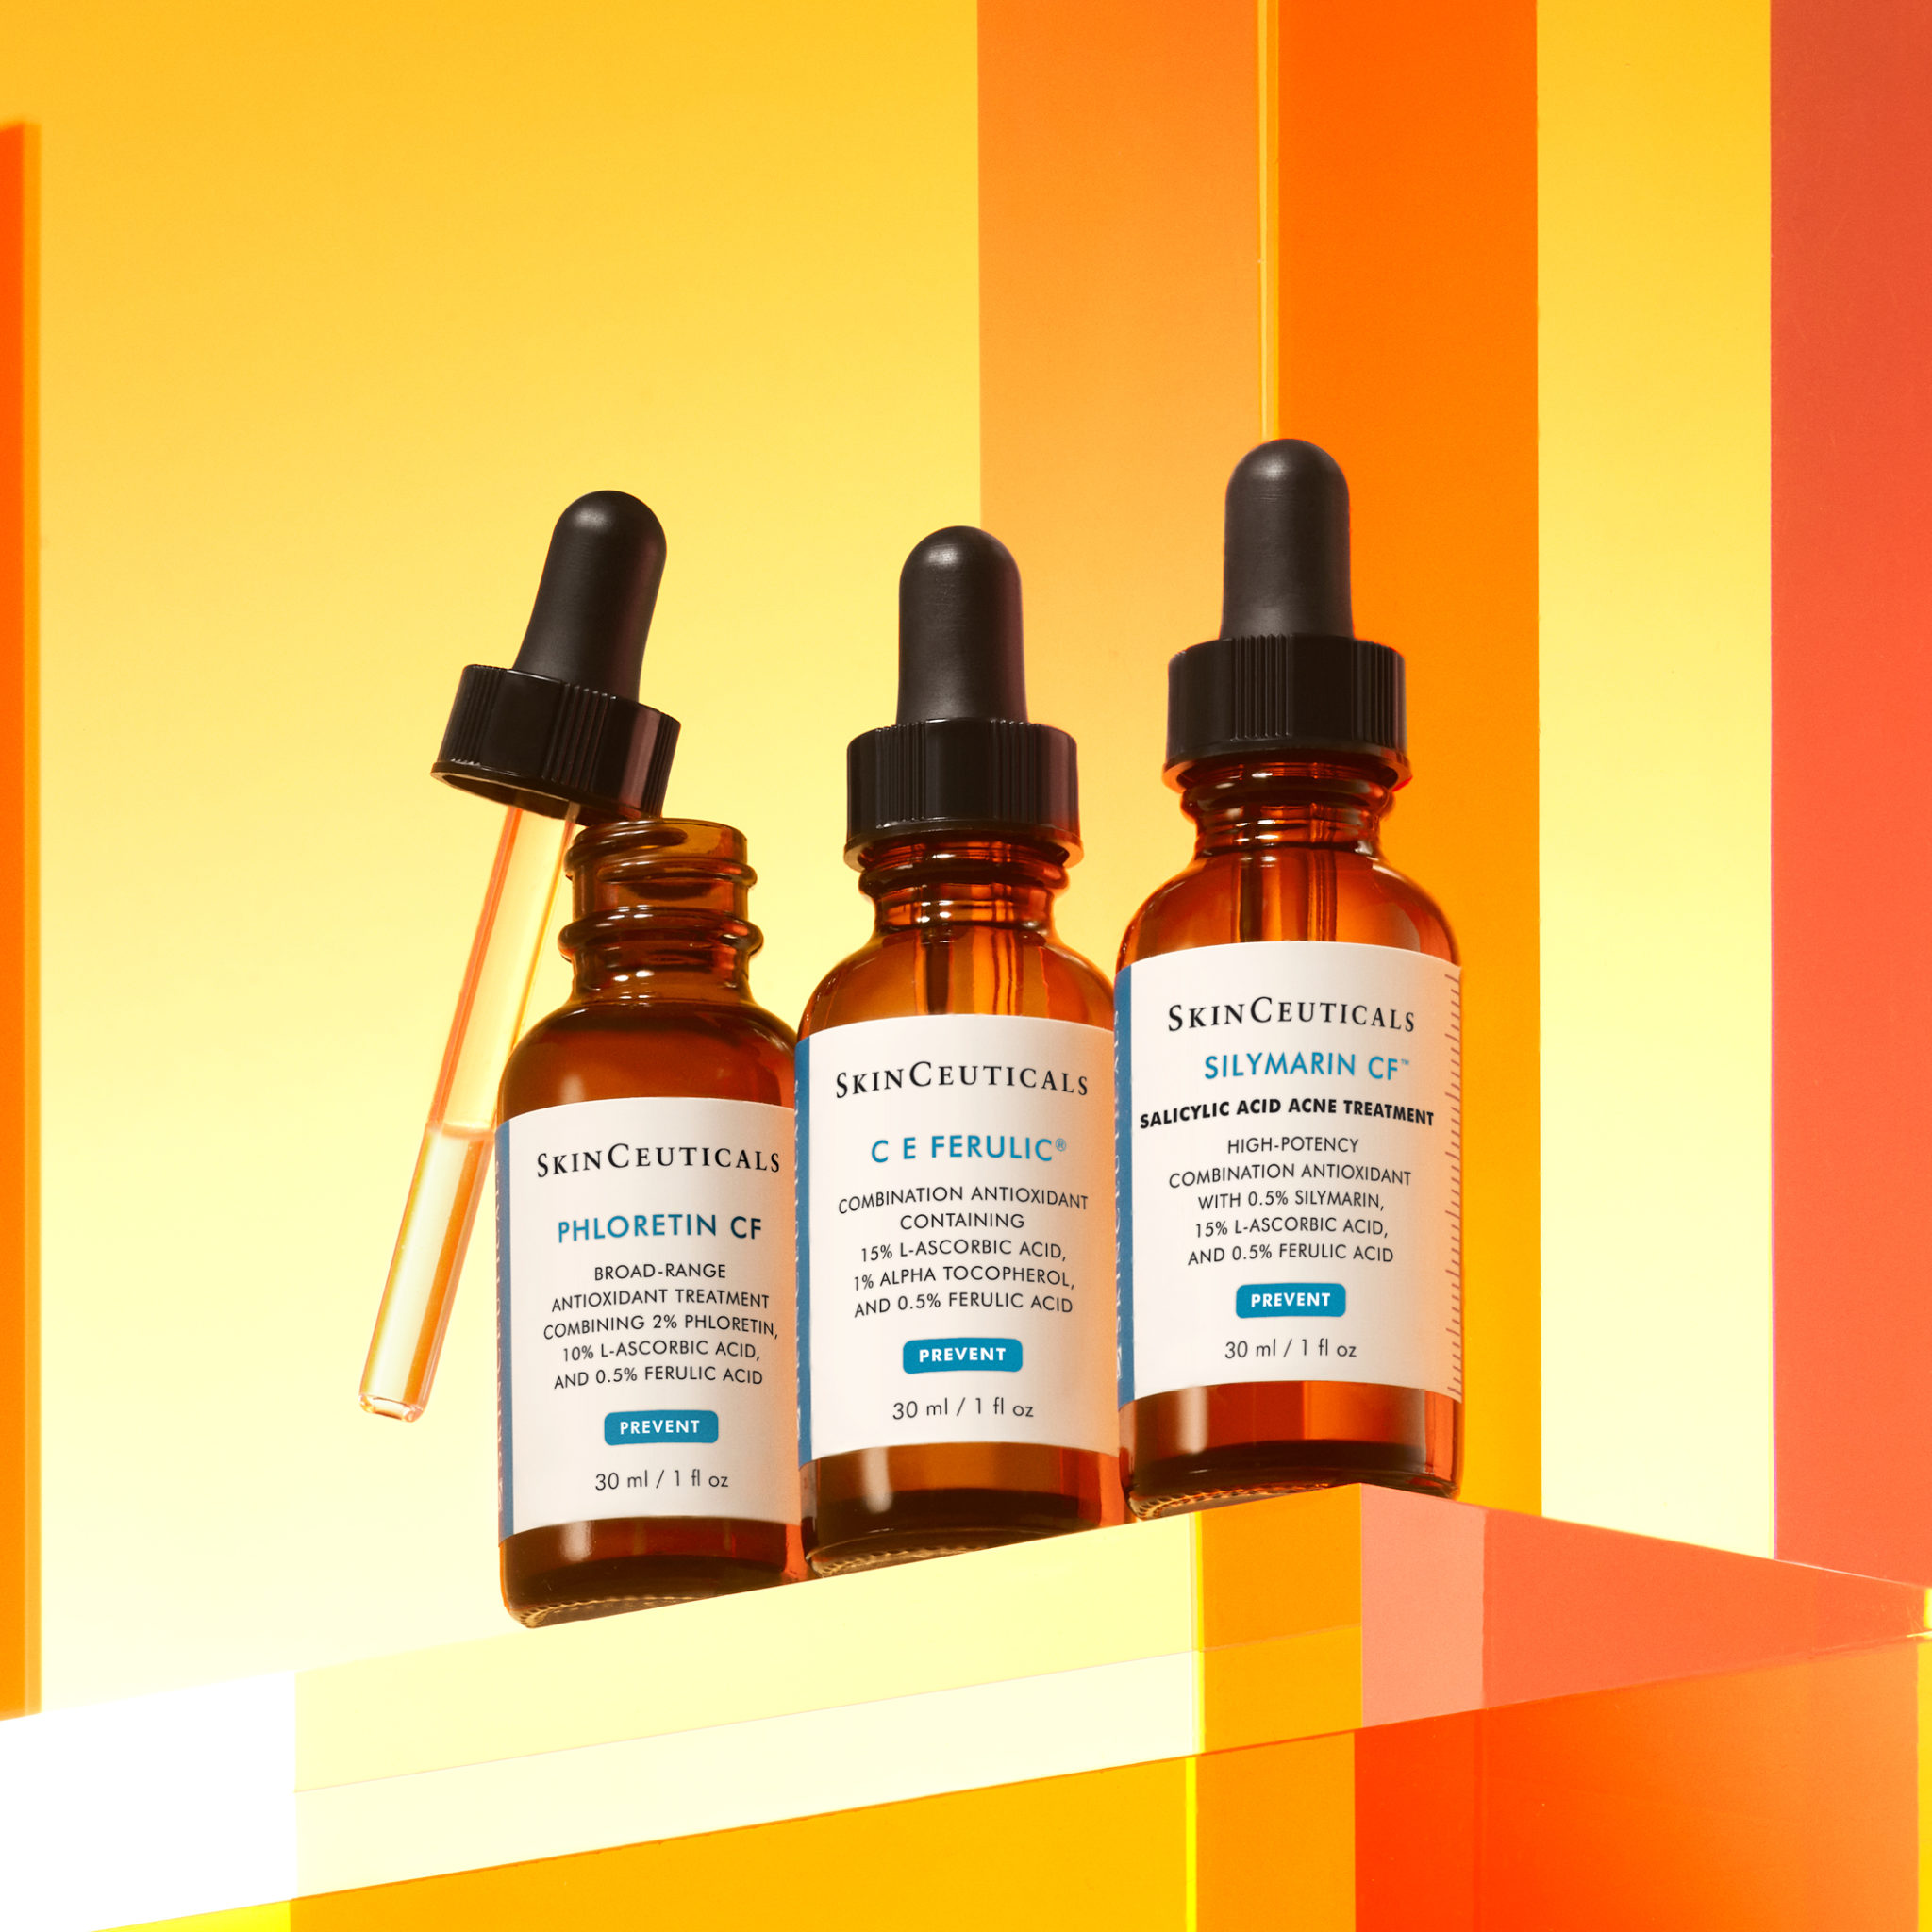 National Vitamin C Day serums from SkinCeuticals, including CE Ferulic, Pholoretin CF, and Silymarin CF